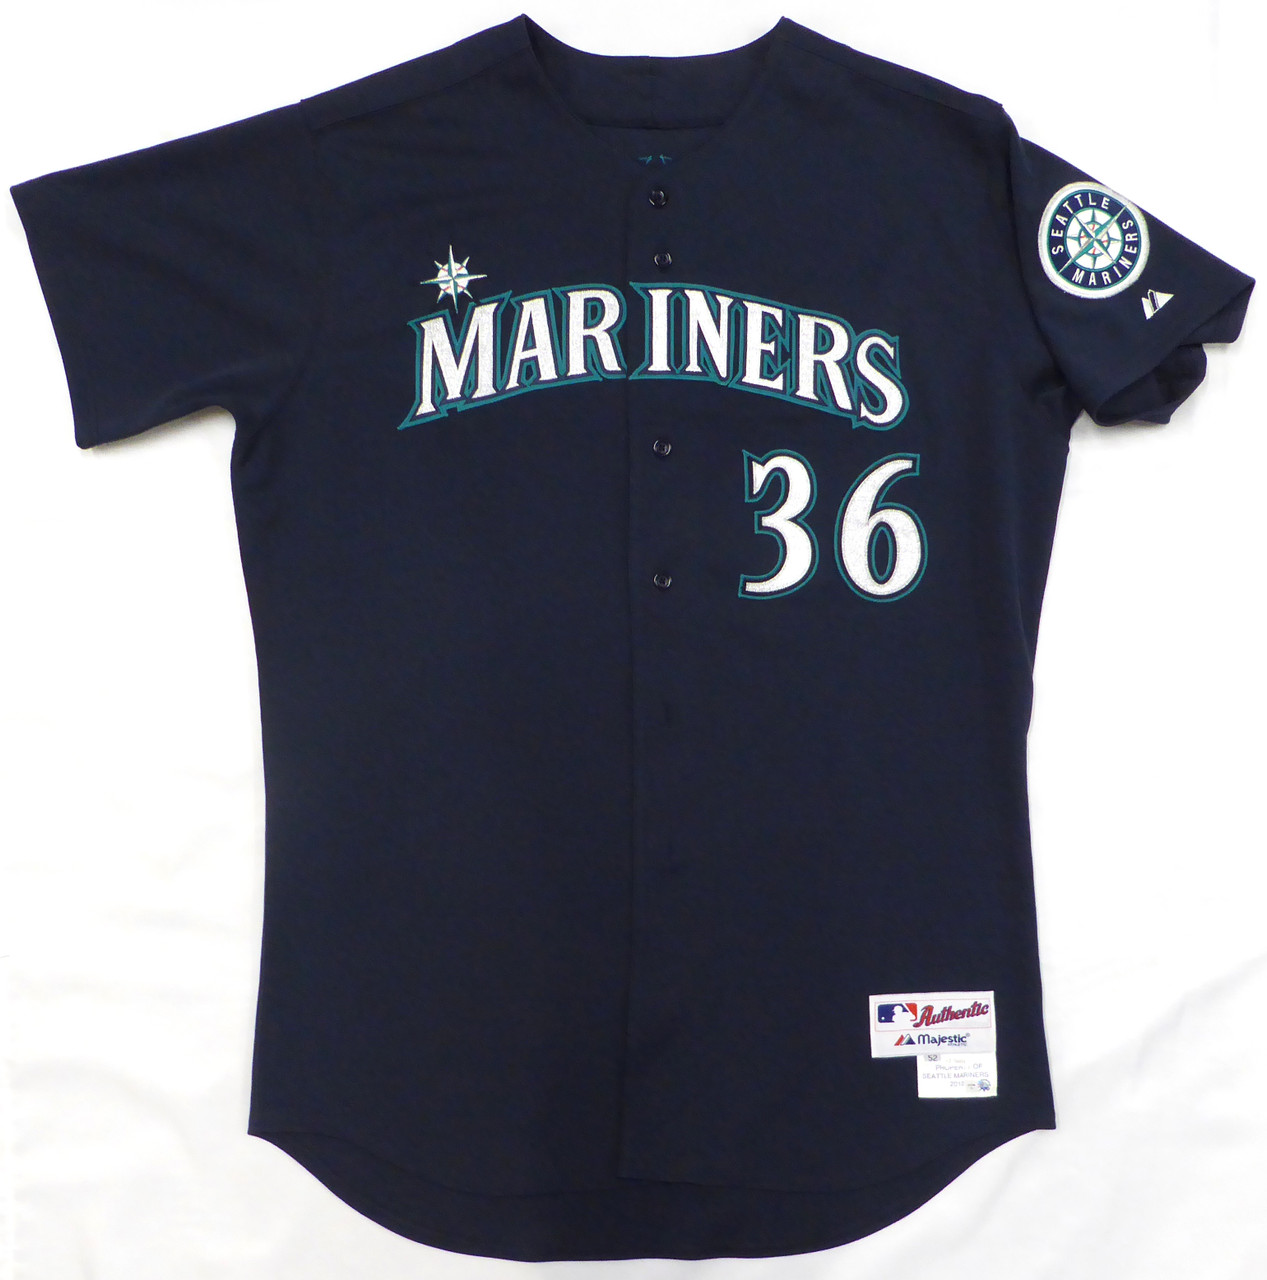 Seattle Mariners Julio Rodriguez Teal Nike Jersey Size L Stock #215377